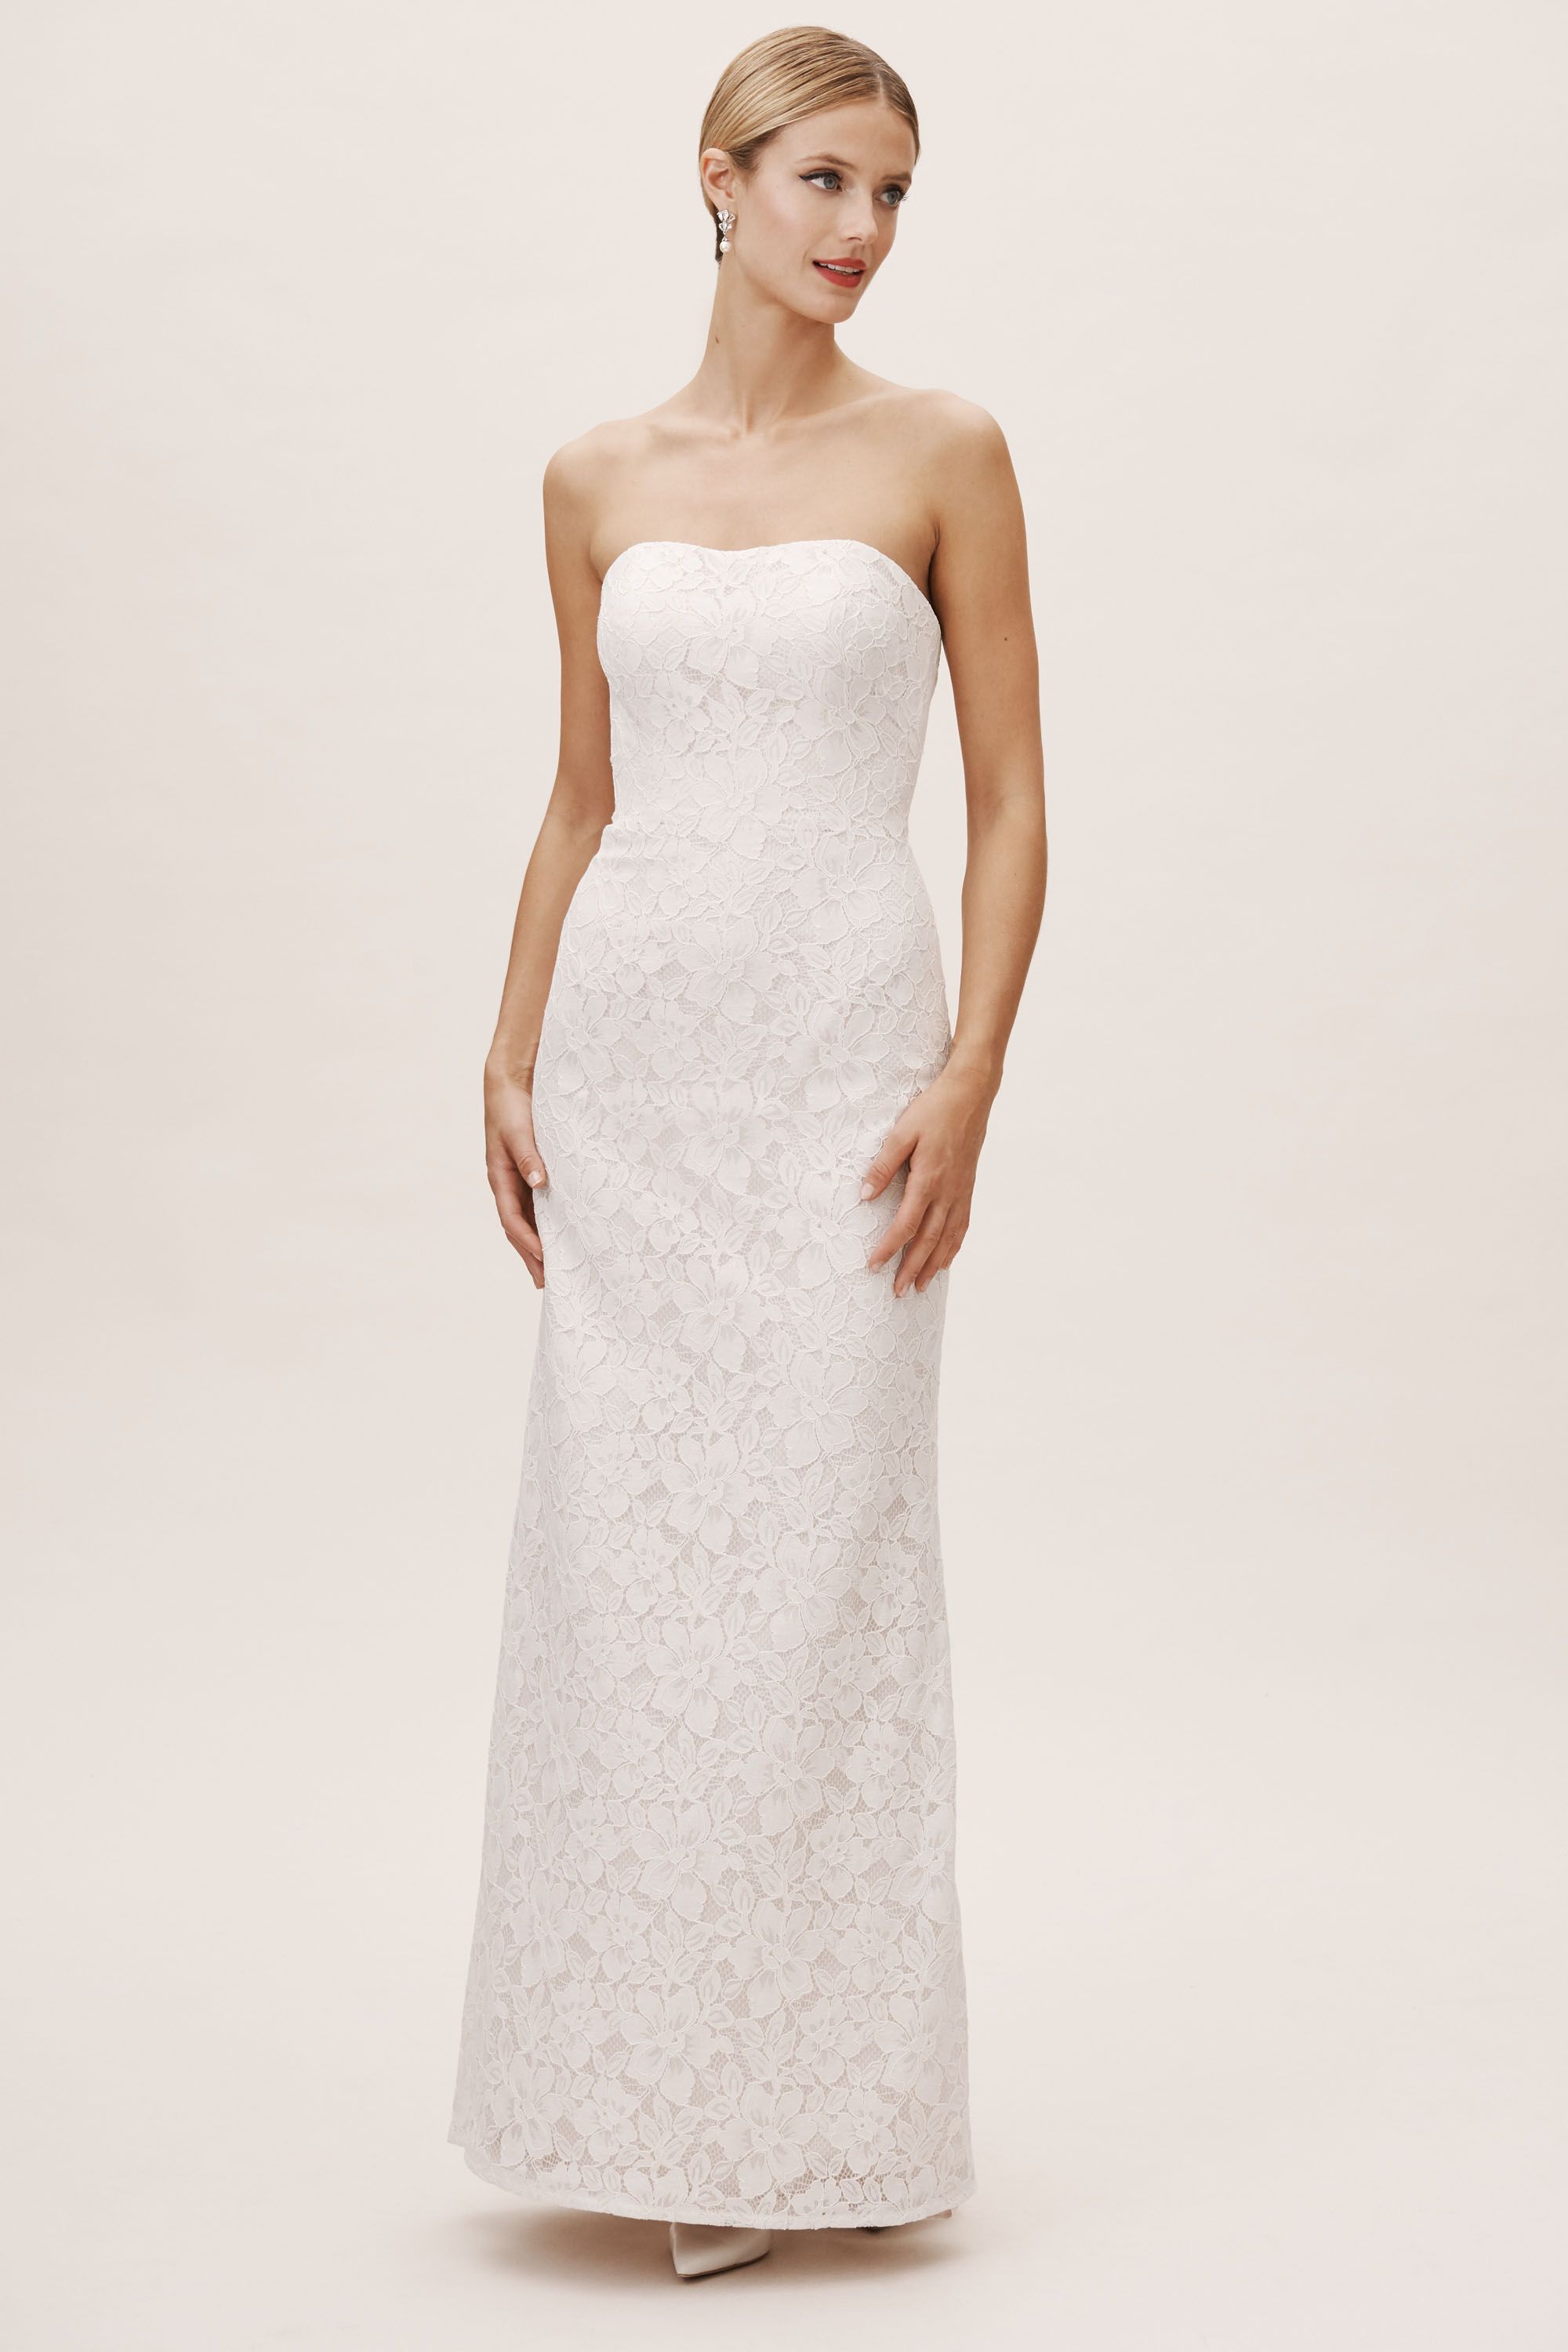 Whispers & Echoes Eastcote Gown - BHLDN